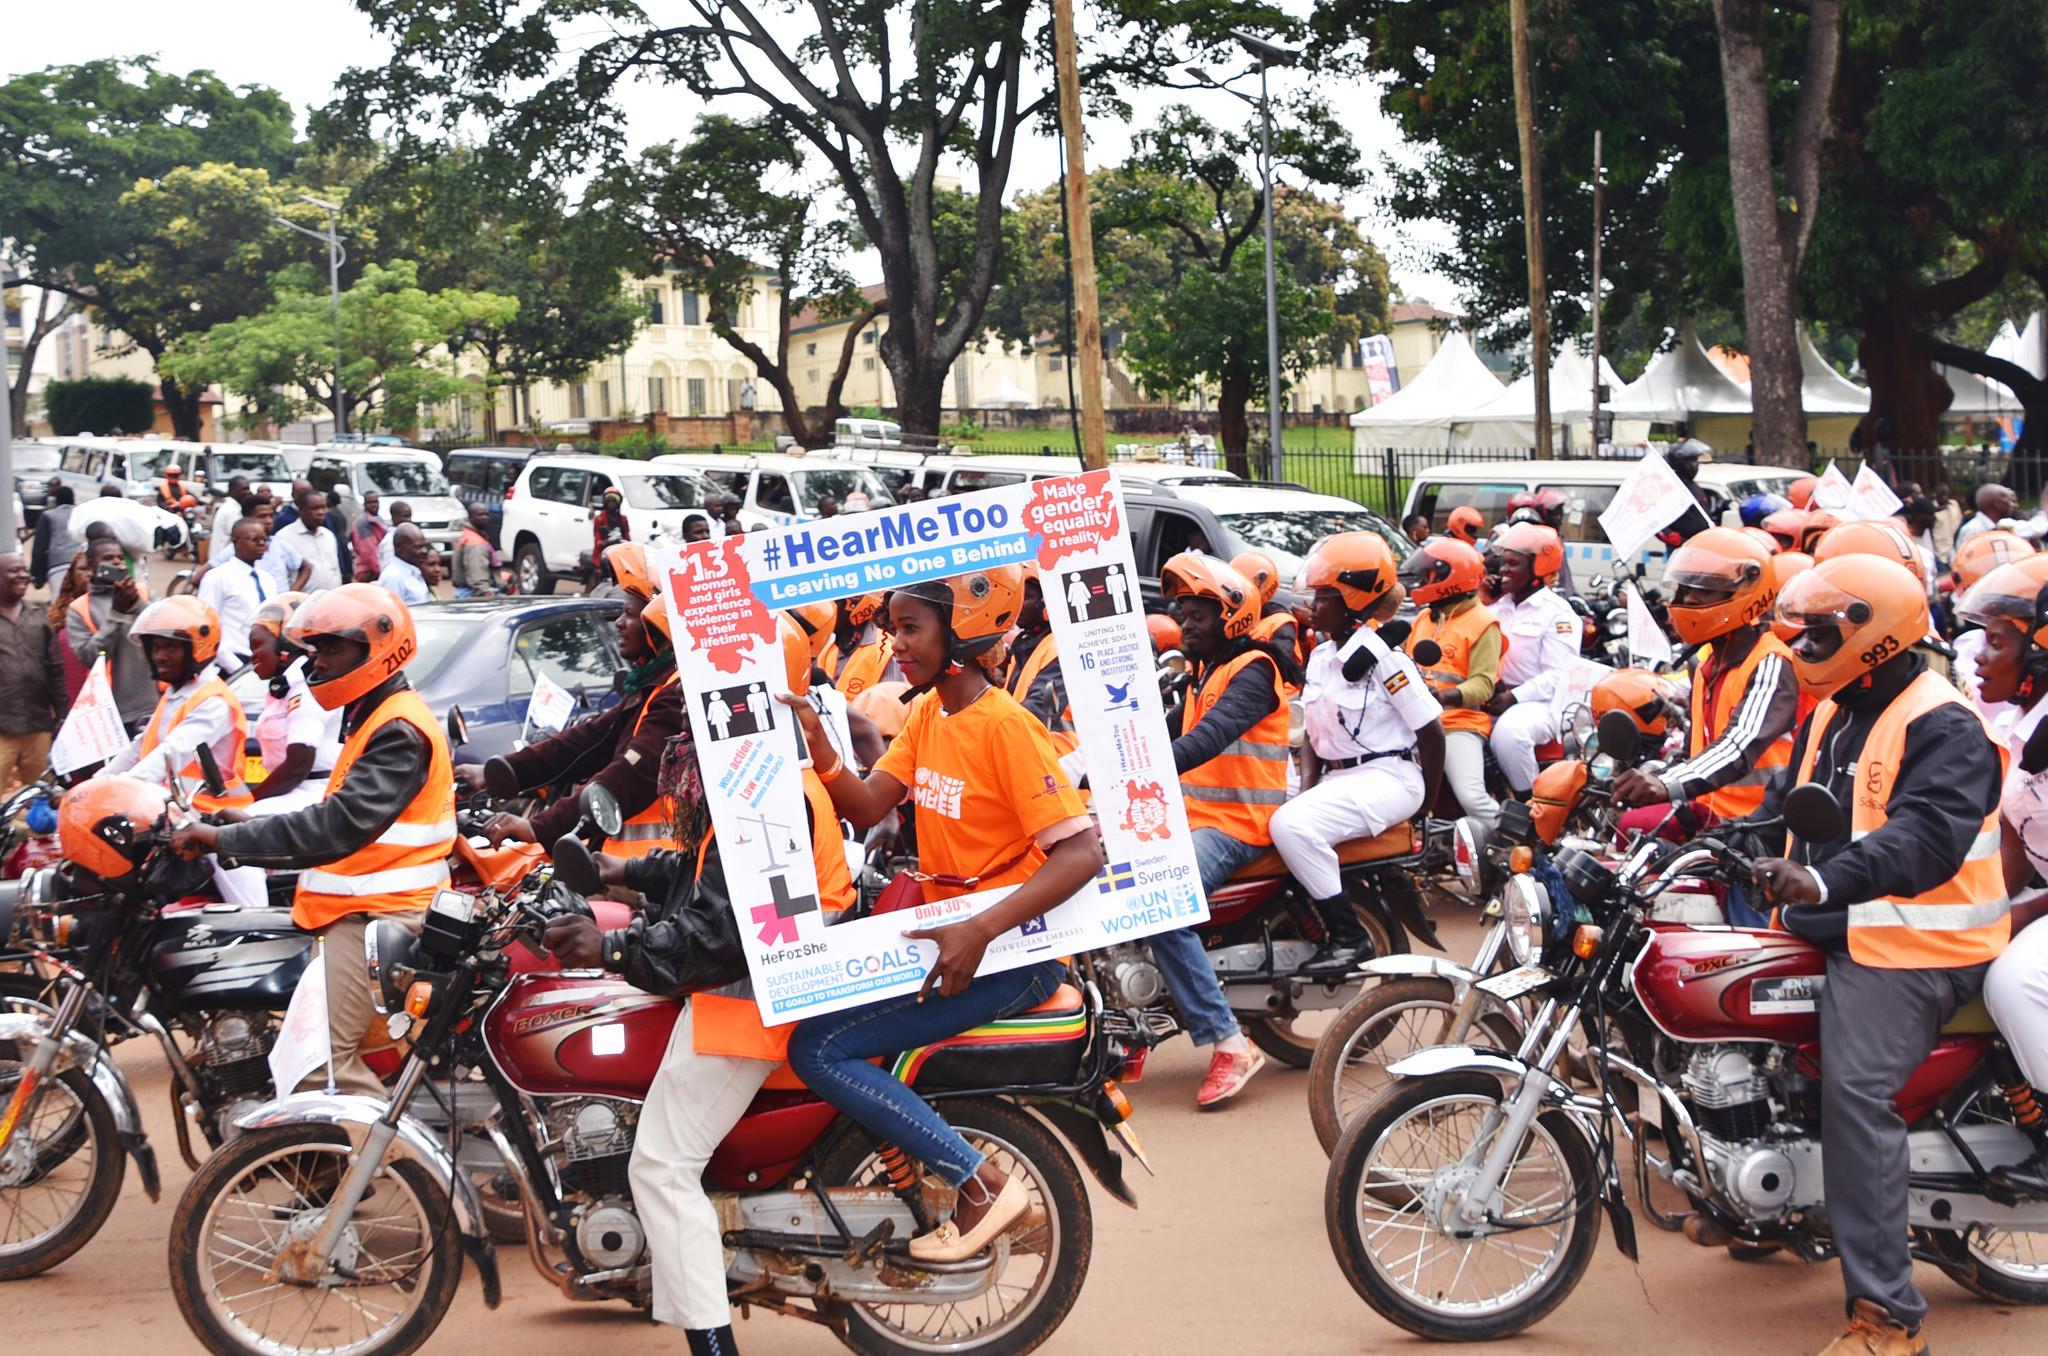 People in Uganda commemorate the 16 Days of Activism against Gender-Based Violence with a bike ride. Photo: UN Women/Martin Ninsiima